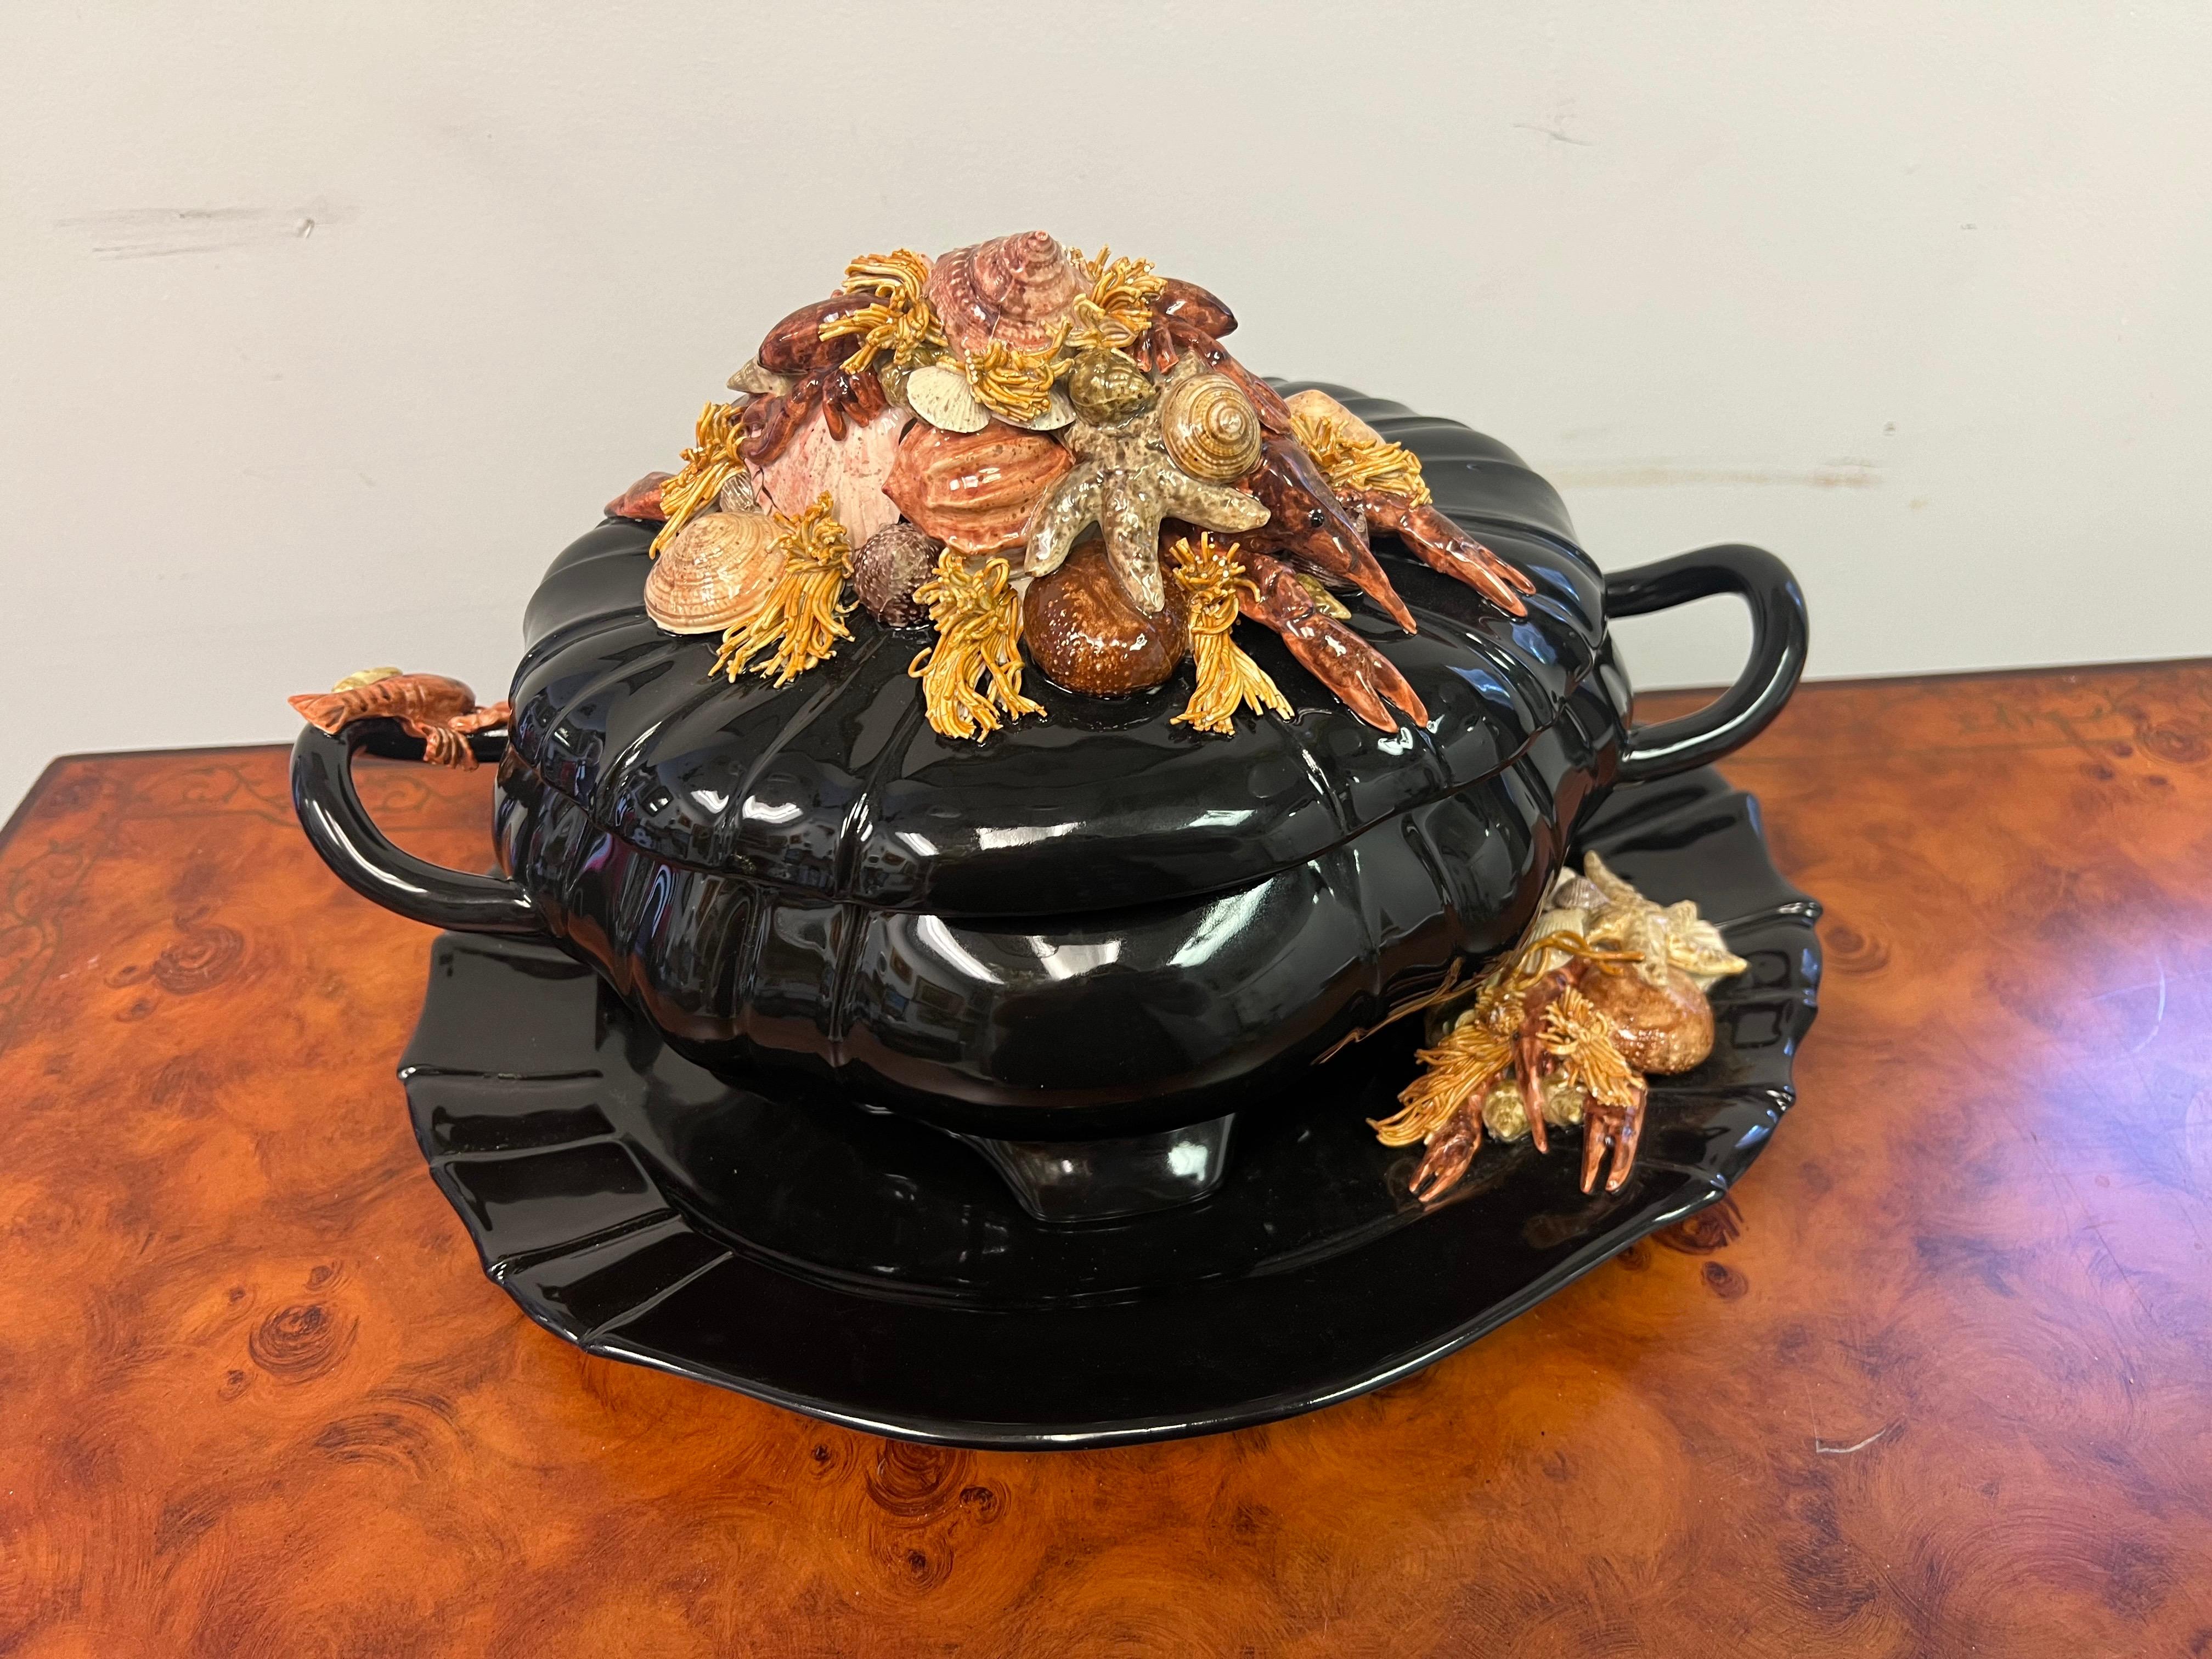 An absolutely fantastic ceramic serving dish encrusted with hand painted shellfish tureen.  Everything from the platter to the handle, and most importantly the top is just stunning with lobster, crawfish, clams, starfish, and more!   The unexpected